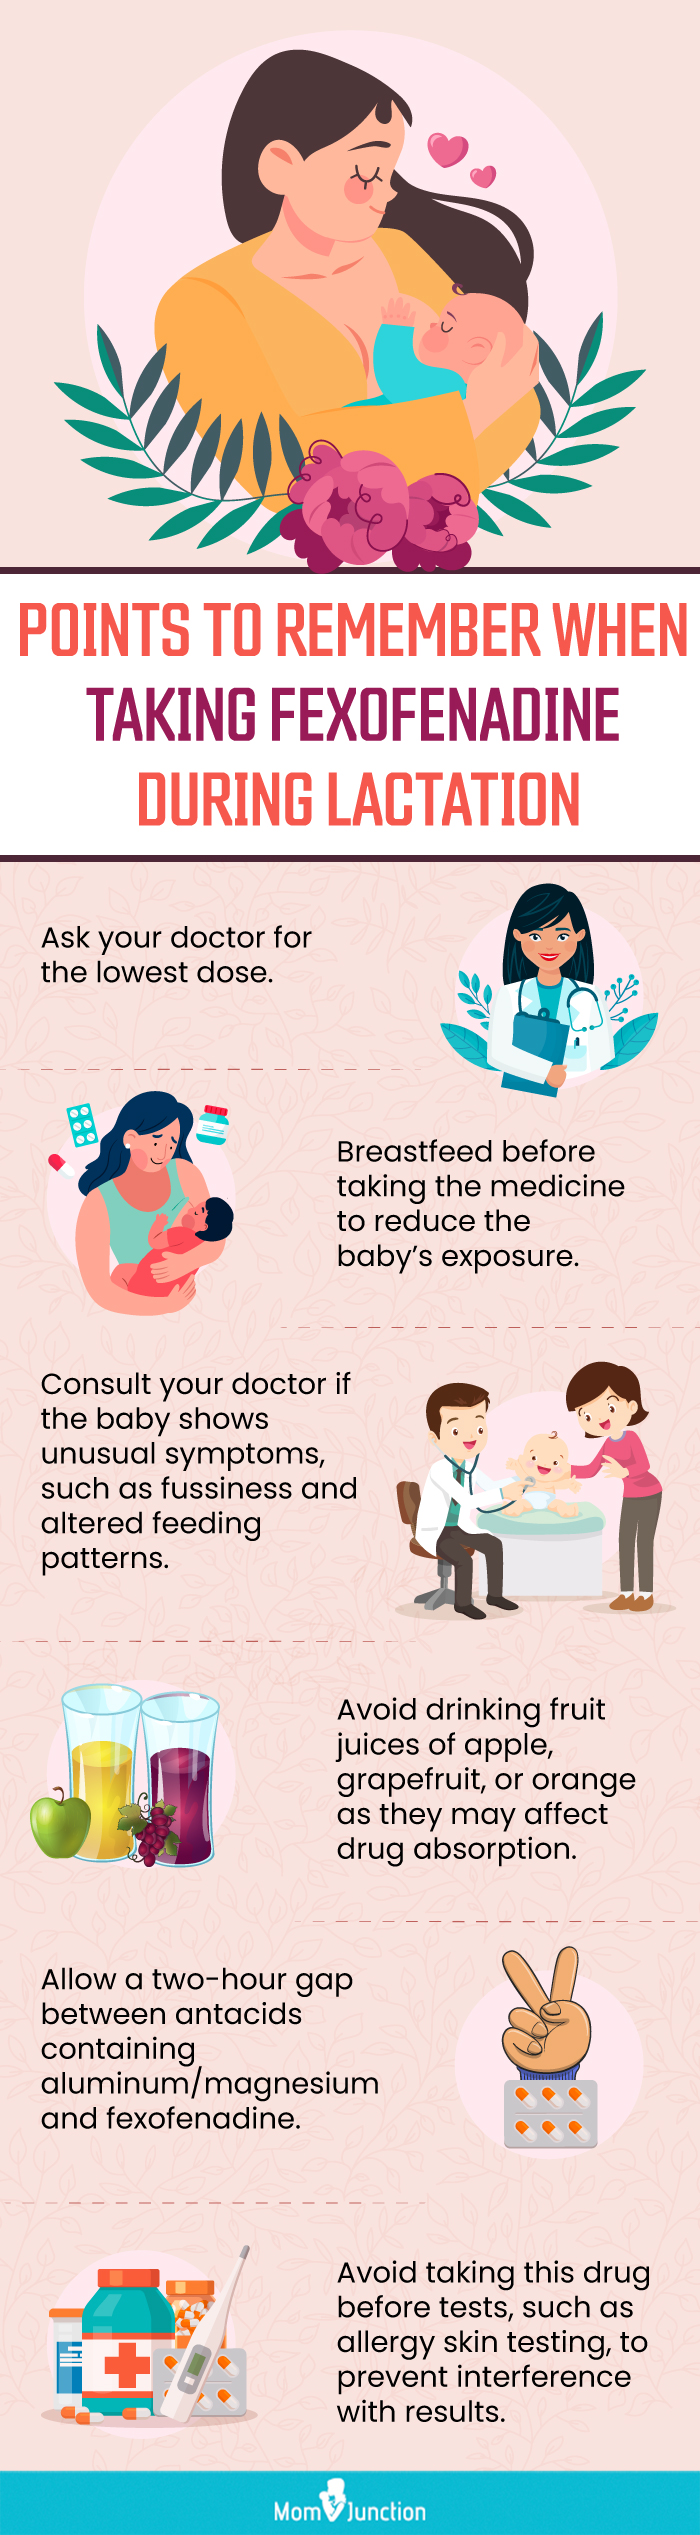 points to remember when taking fexofenadine during lactation (infographic)